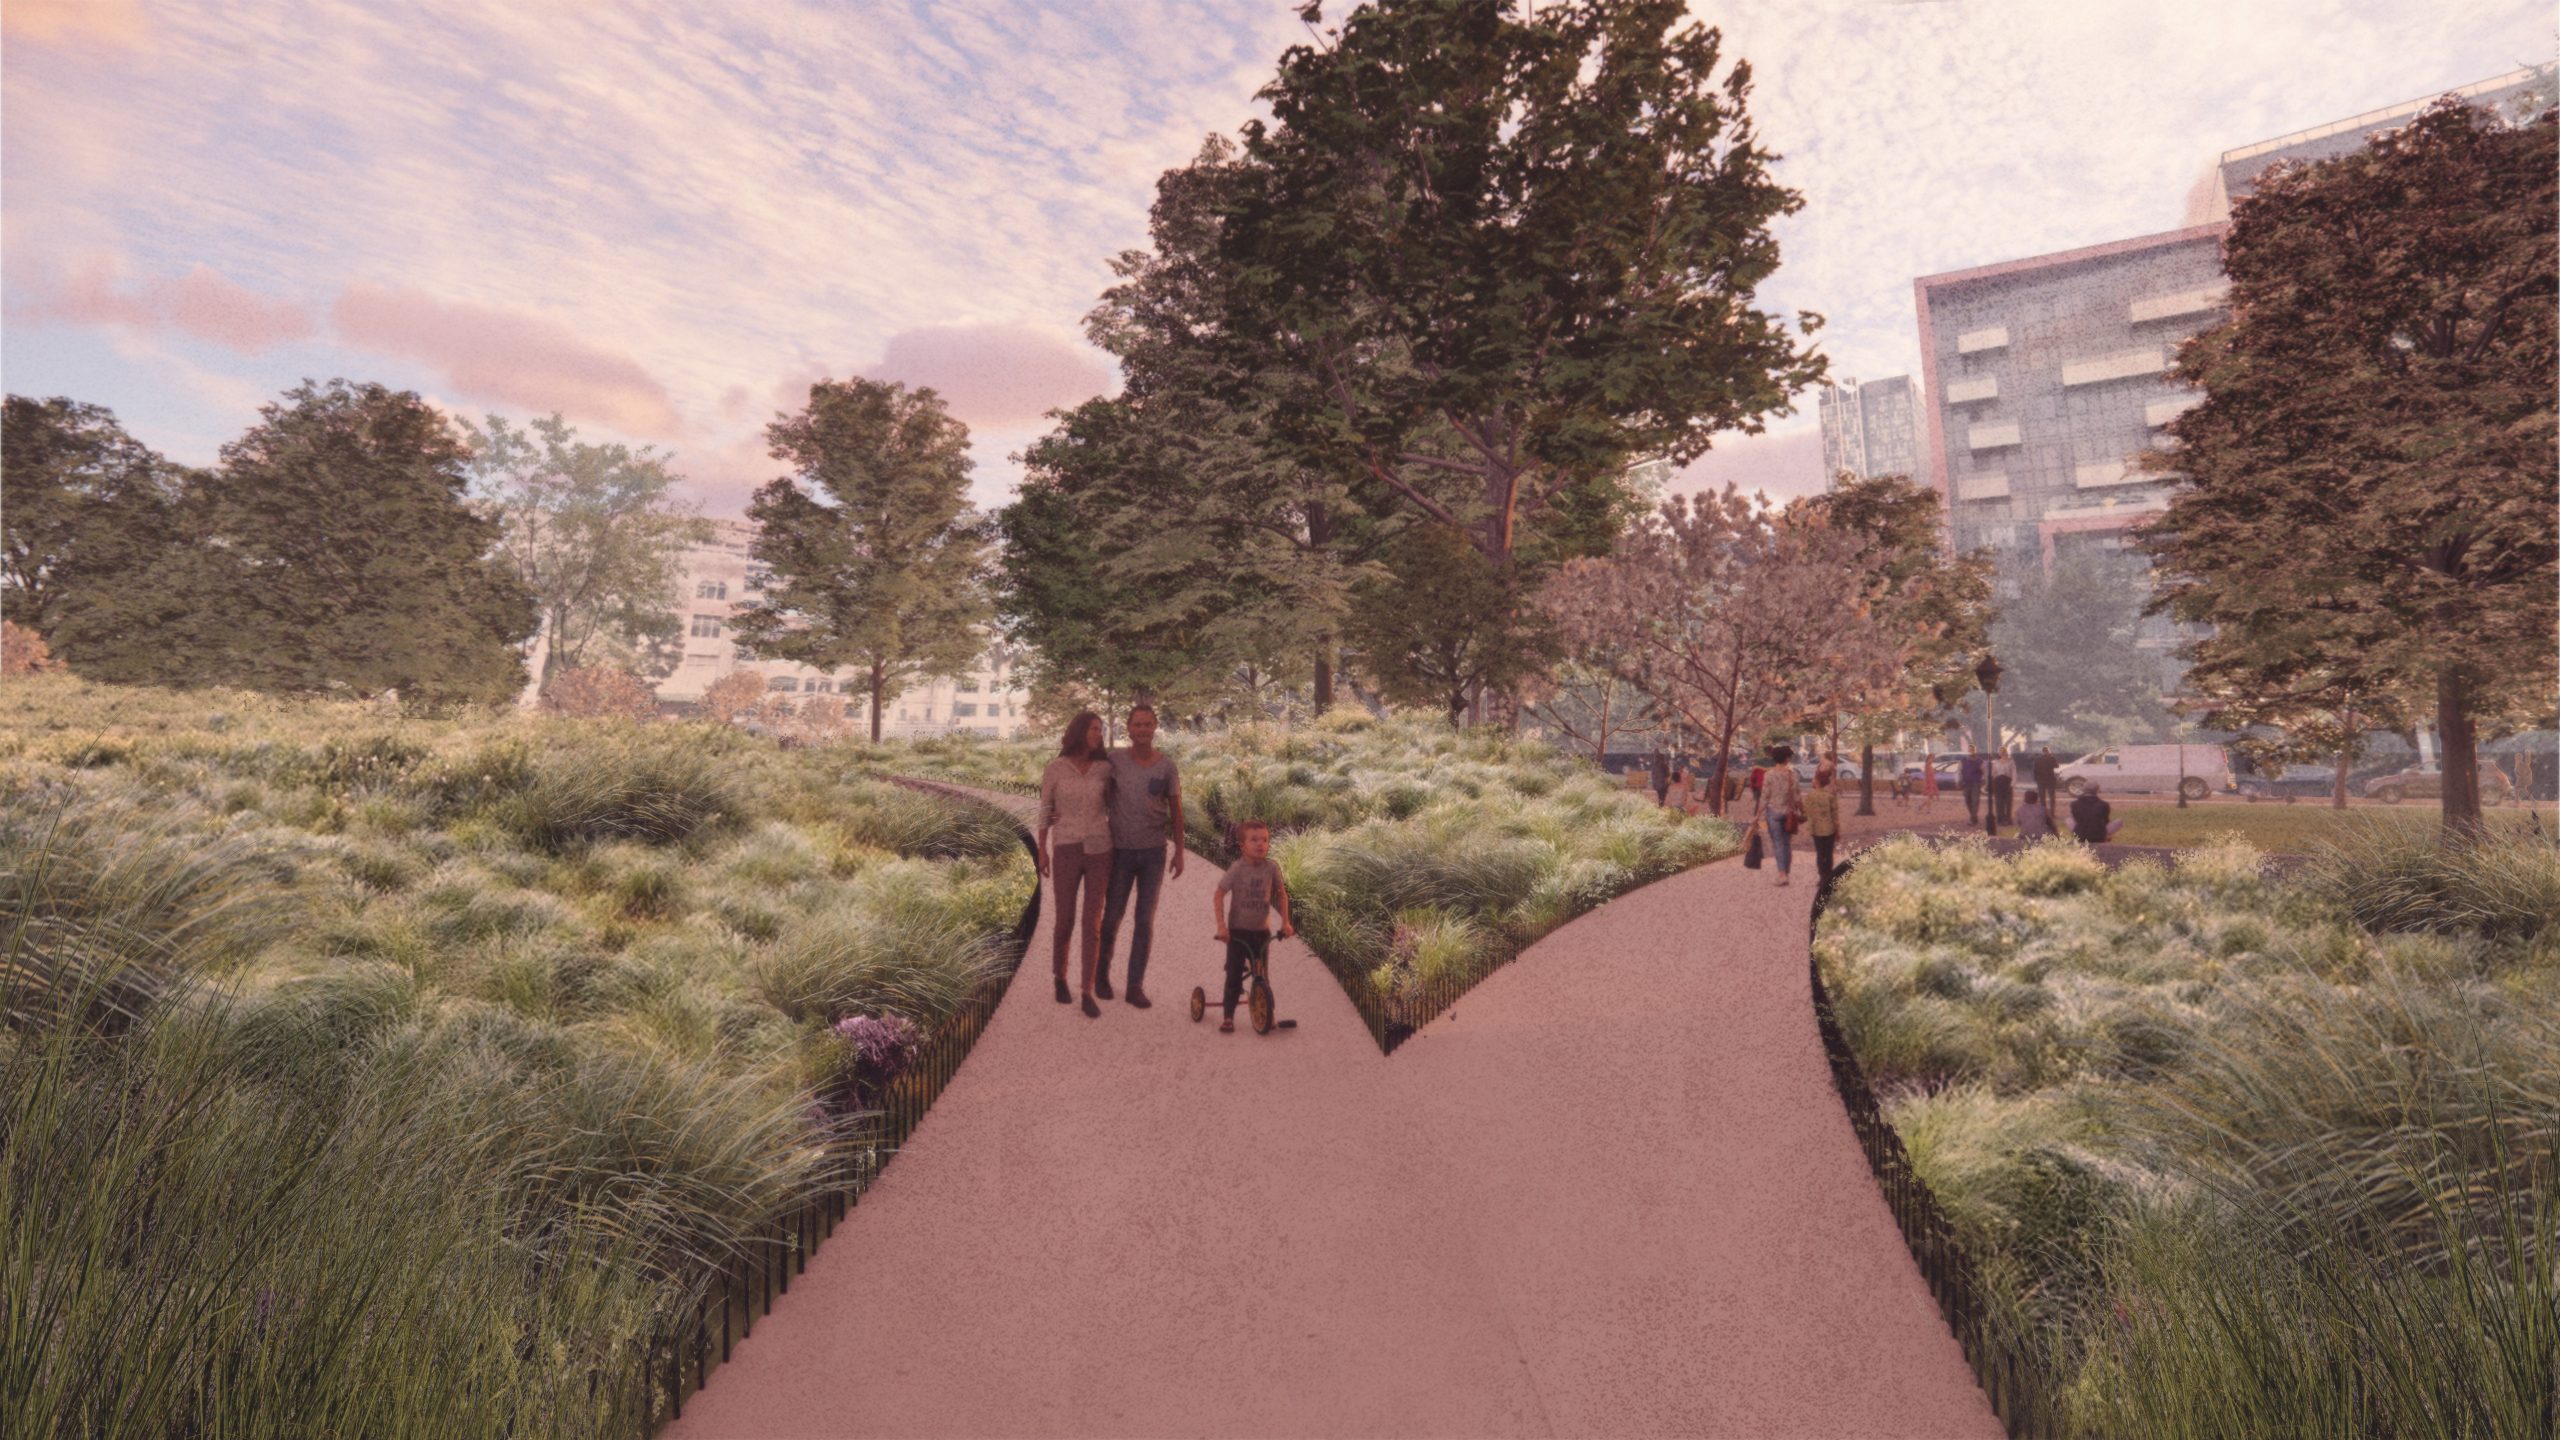 Rendered view looking southeast shows people walking on a path through the centre of the cemetery area, surrounded by mounds of grass meadow. The view is framed by a mature canopy of trees and a couple of smaller flowering trees.